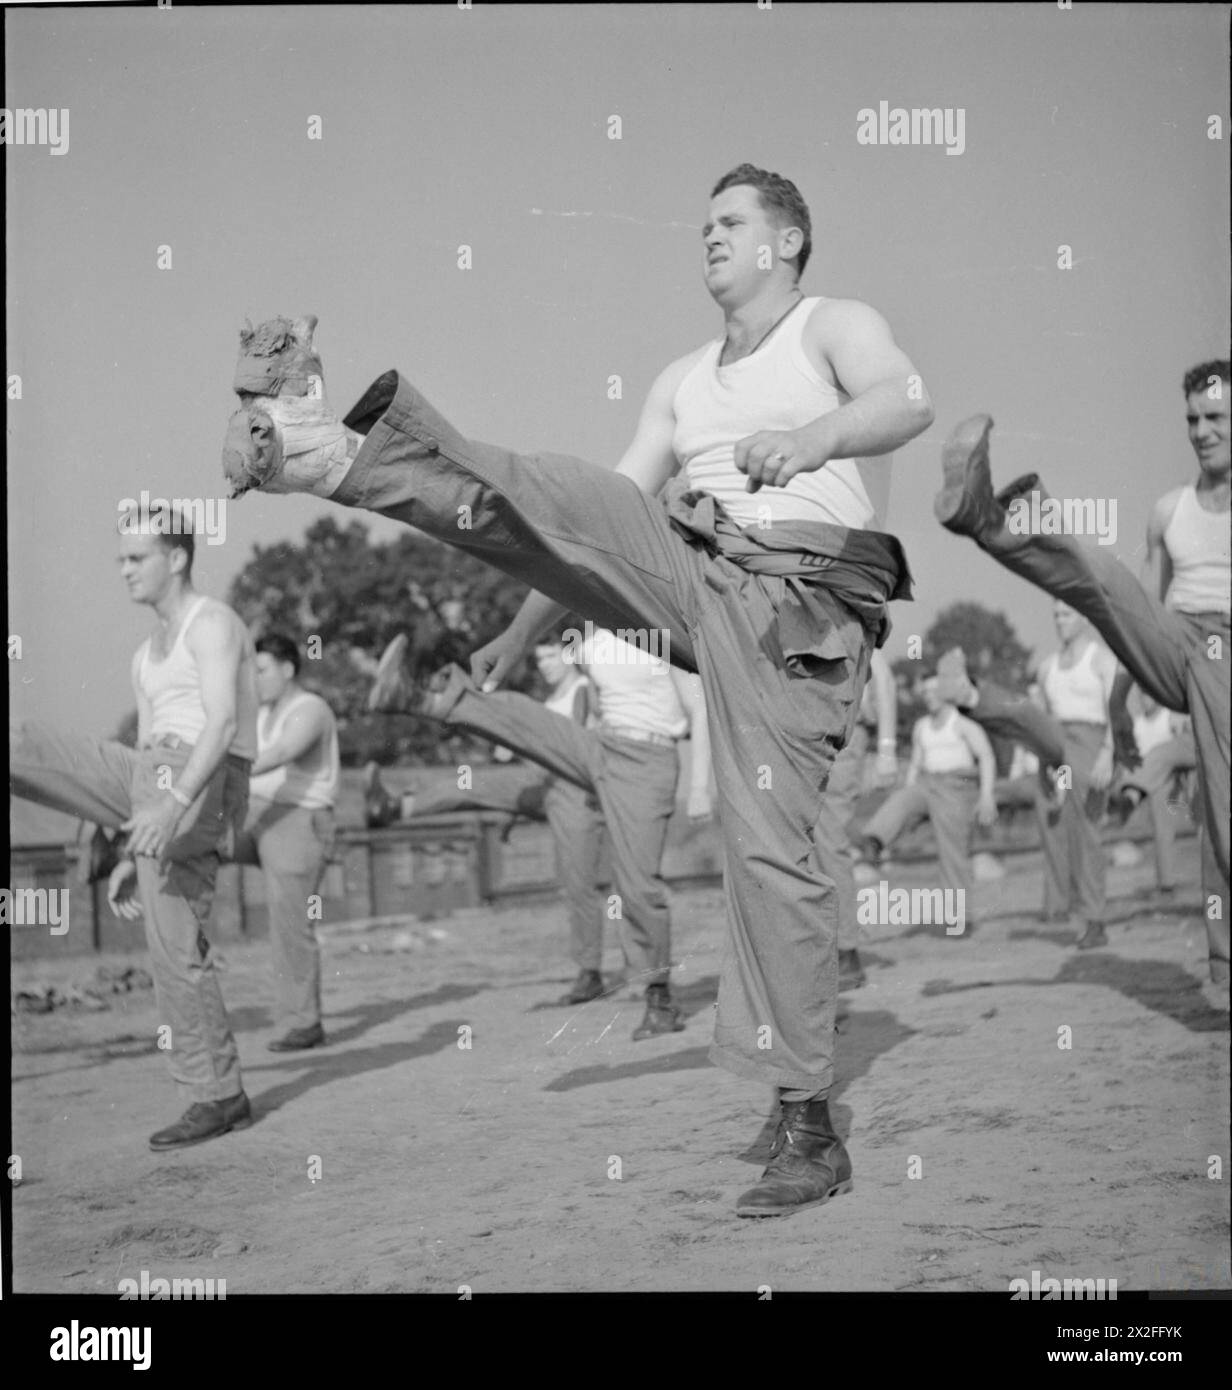 FIRST US ARMY REHABILITATION CENTRE: RECUPERATION AND TRAINING AT 8TH CONVALESCENT HOSPITAL, STONELEIGH PARK, KENILWORTH, WARWICKSHIRE, UK, 1943 - Sergeant M M 'Big Momma' Swindele kicks his leg into the air during an early morning Physical Training session on the parade ground of 8th Convalescent Hospital, Stoneleigh Park. Sergeant Swindele is originally from Oakman, Alabama and fractured his ankle, which is clearly heavily bandaged, in the British blackout. He is in the lowest grade of trainees, grade D, which means that he has quite a way to go before he reaches grade A and full fitness. Ac Stock Photo